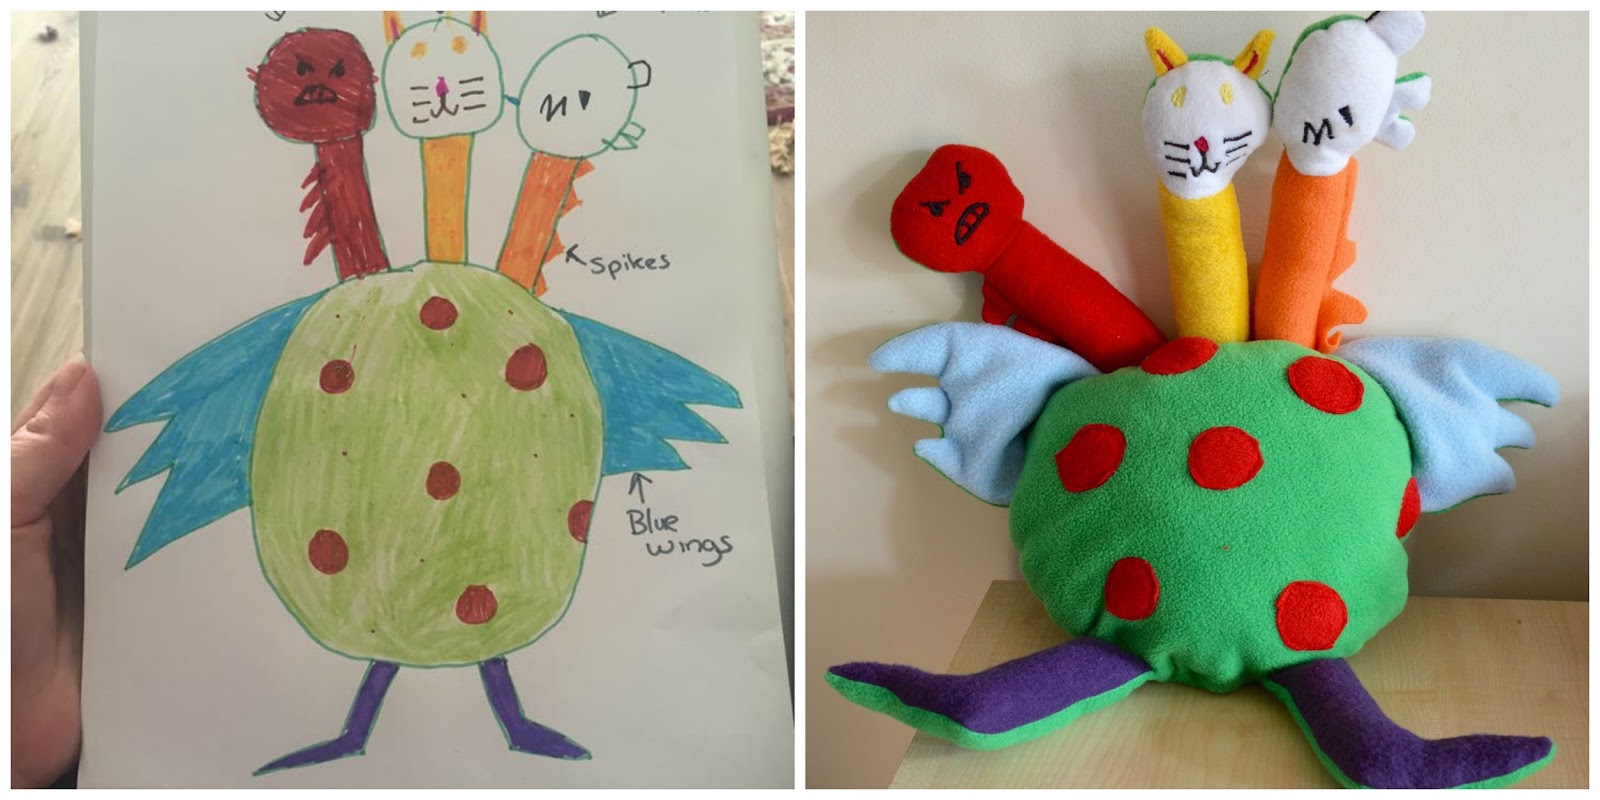 Designing Our Dream Pet with Petplan - Introducing 'Tri-Dragon'